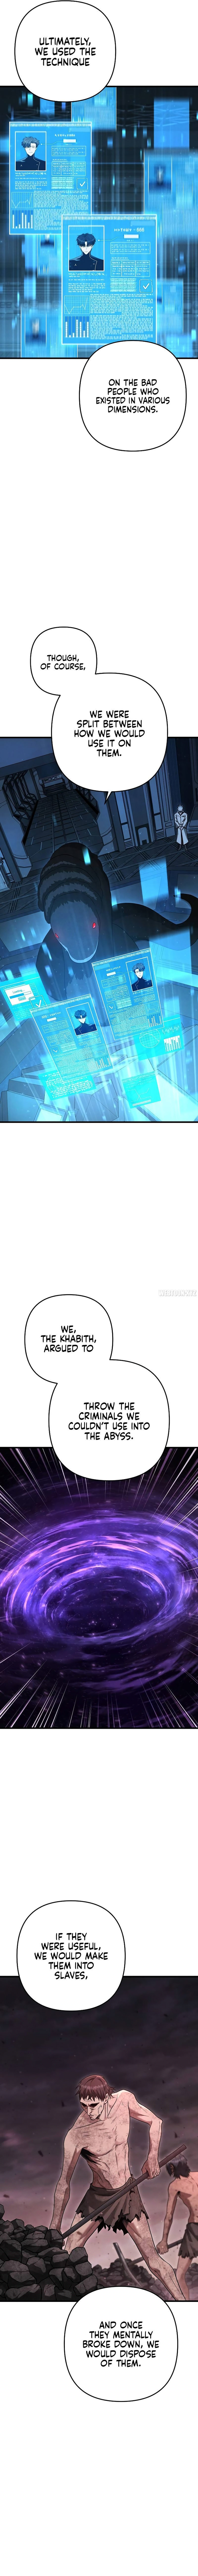 foreigner-on-the-periphery-chap-39-2